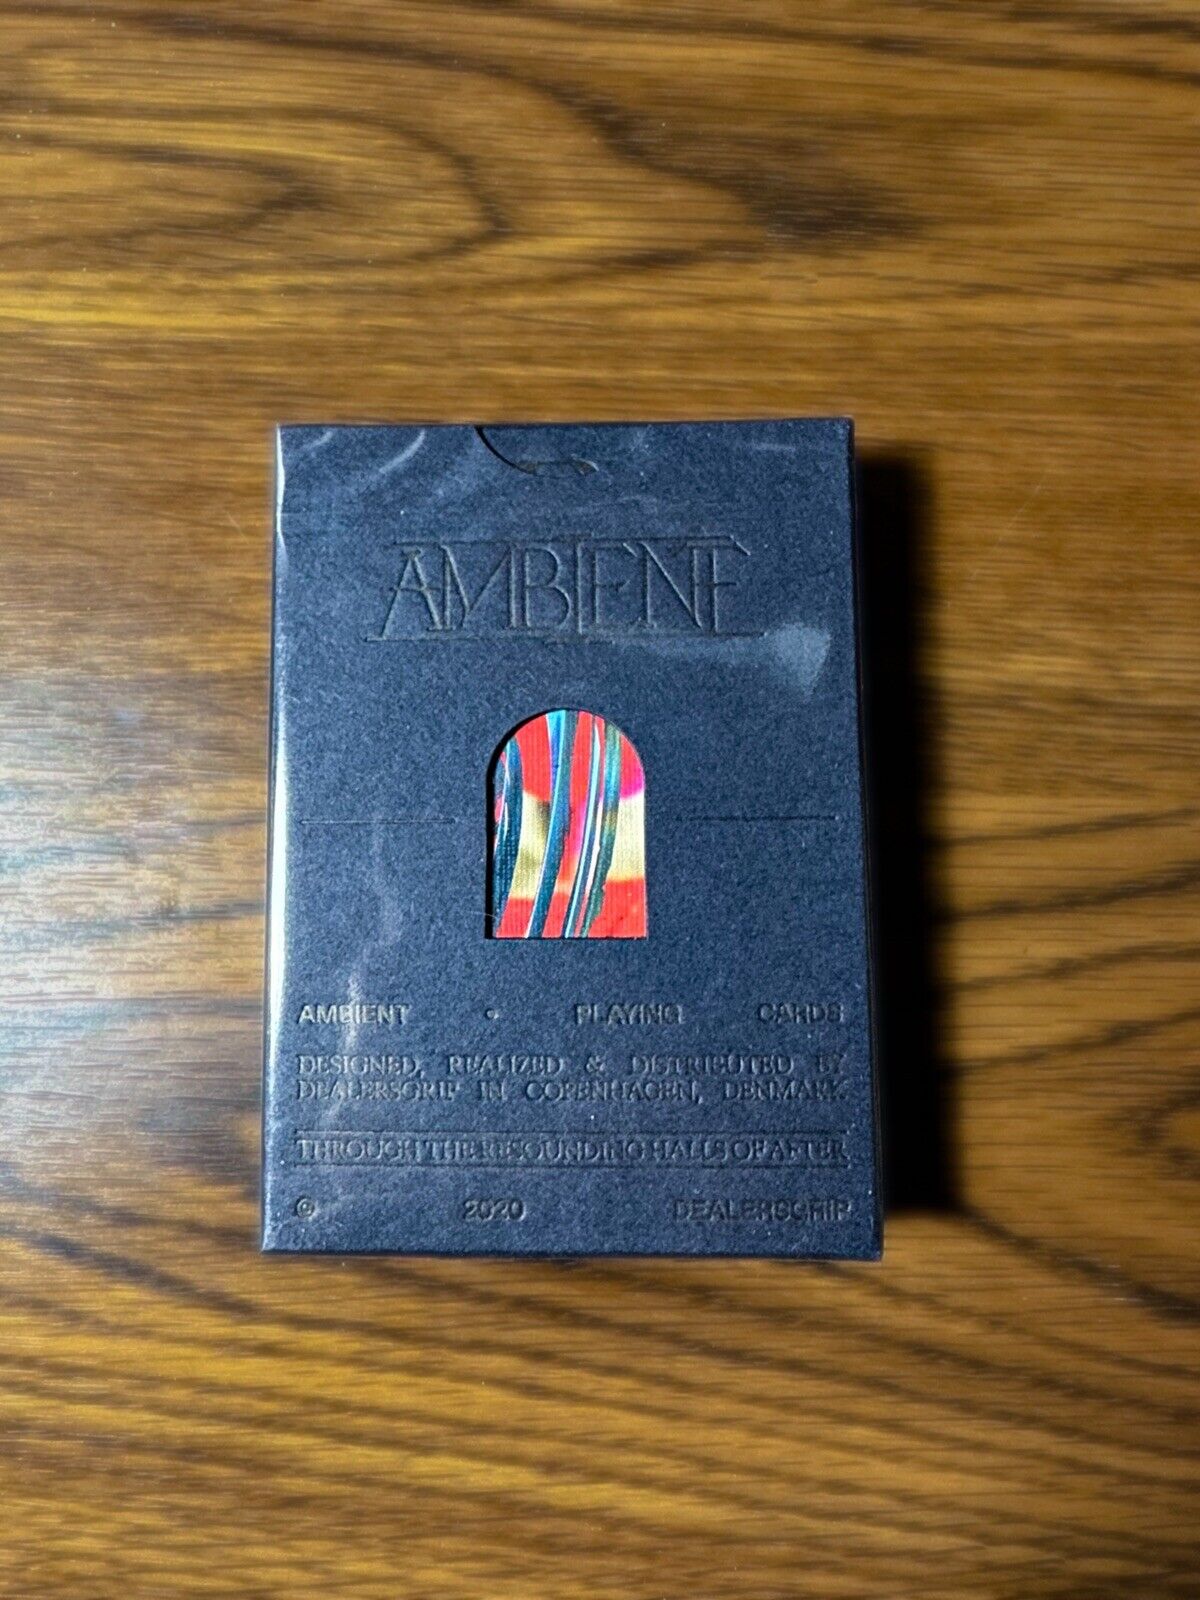 Ambient MUTED Tuck Playing Cards EXTREMELY RARE DEALERSGRIP 1 of 52 Fontaine